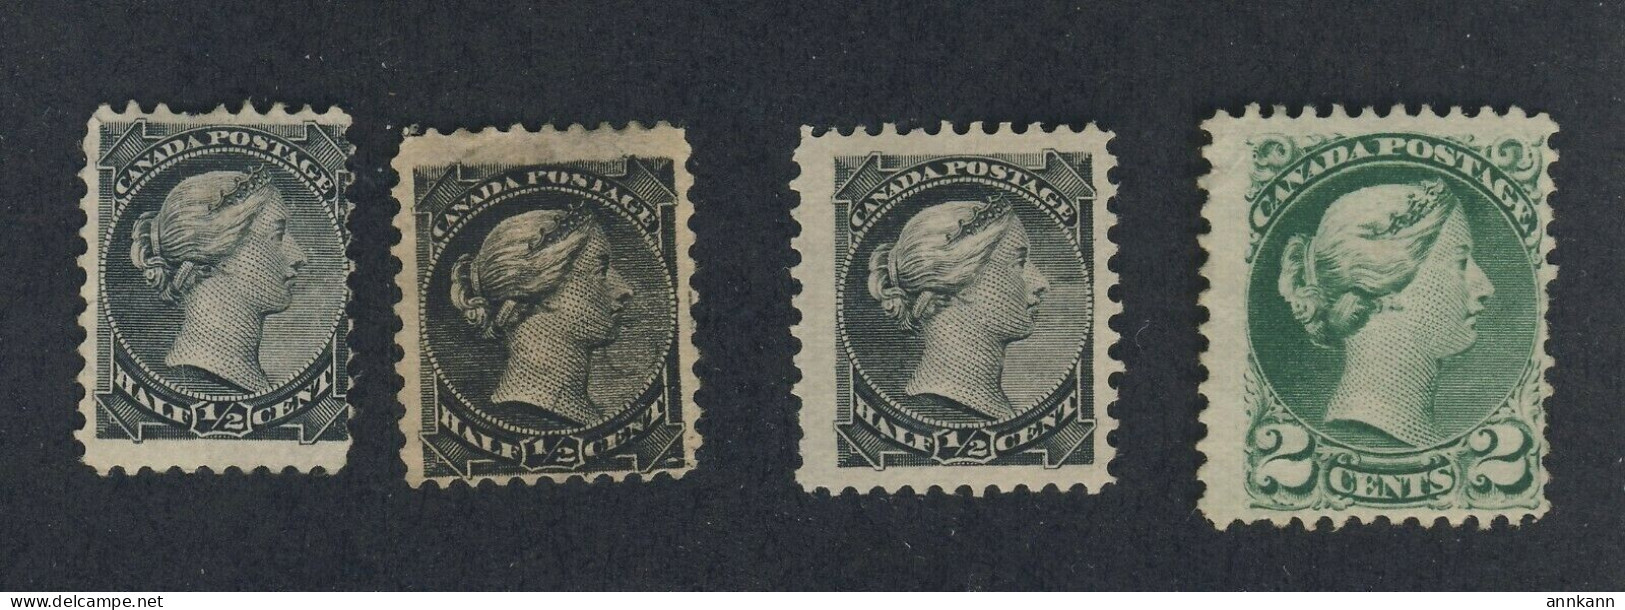 4x Canada Small Queen MNG Stamps 3x #34-1/2c F F/VF VF #36-2c Fine GV = $100.00 - Ungebraucht